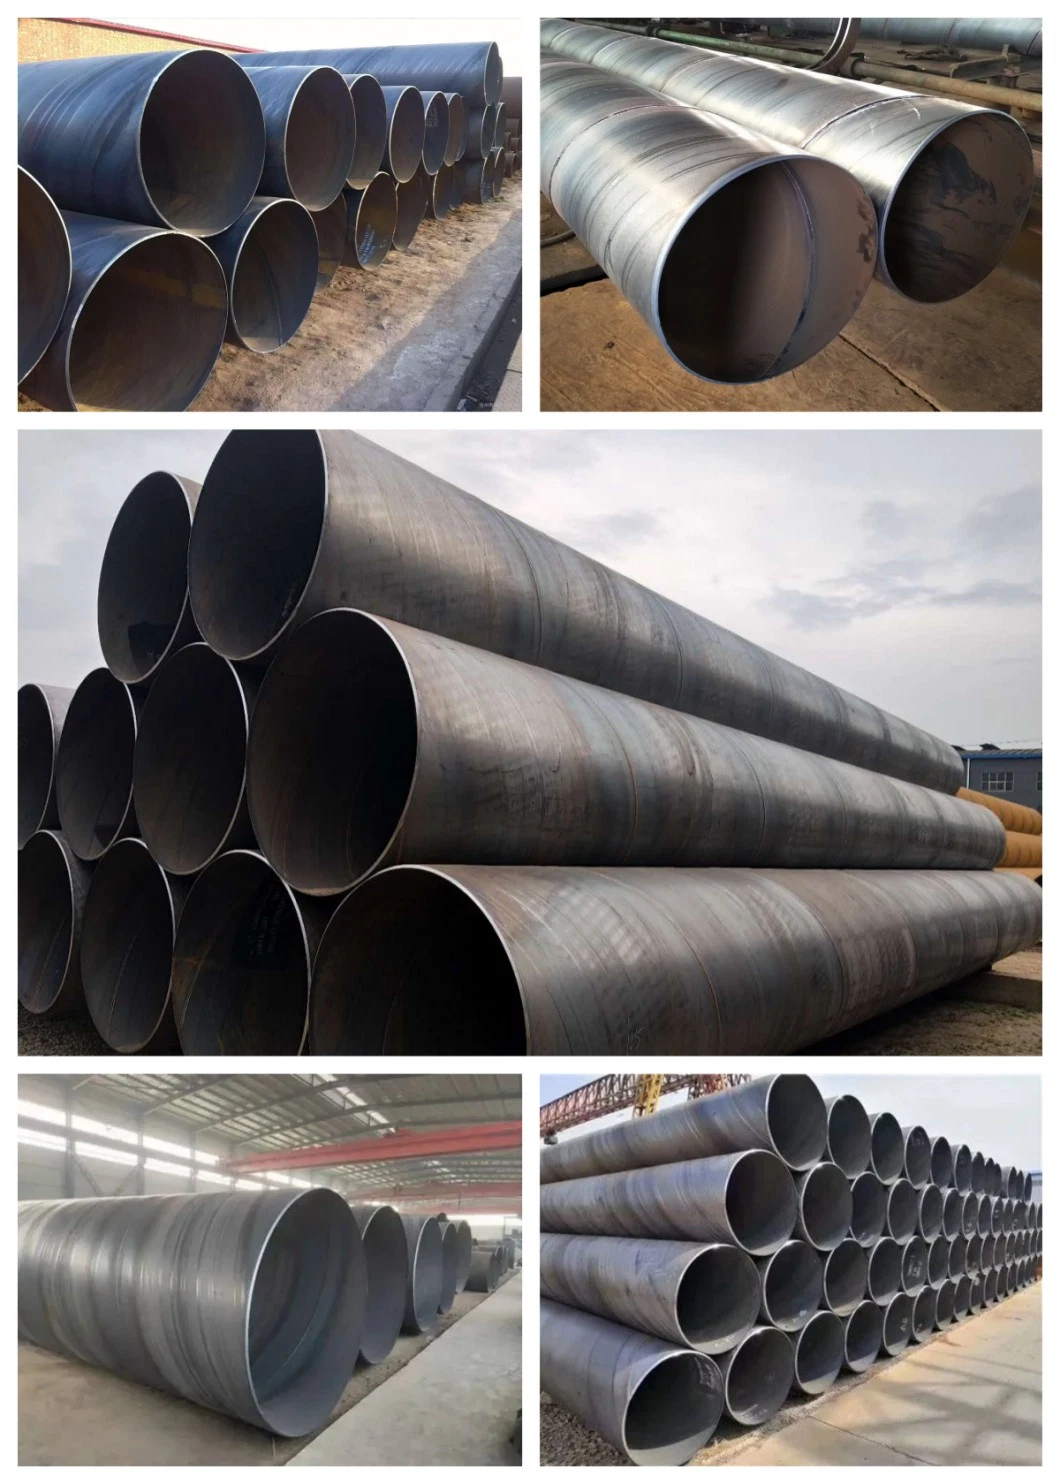 Hot Sales BS En GB SSAW ASTM A252 Spiral Welded Pipe Black Steel Pipe ERW Pipe Spiral Welded Pipe Welded Carbon Steel Pipe